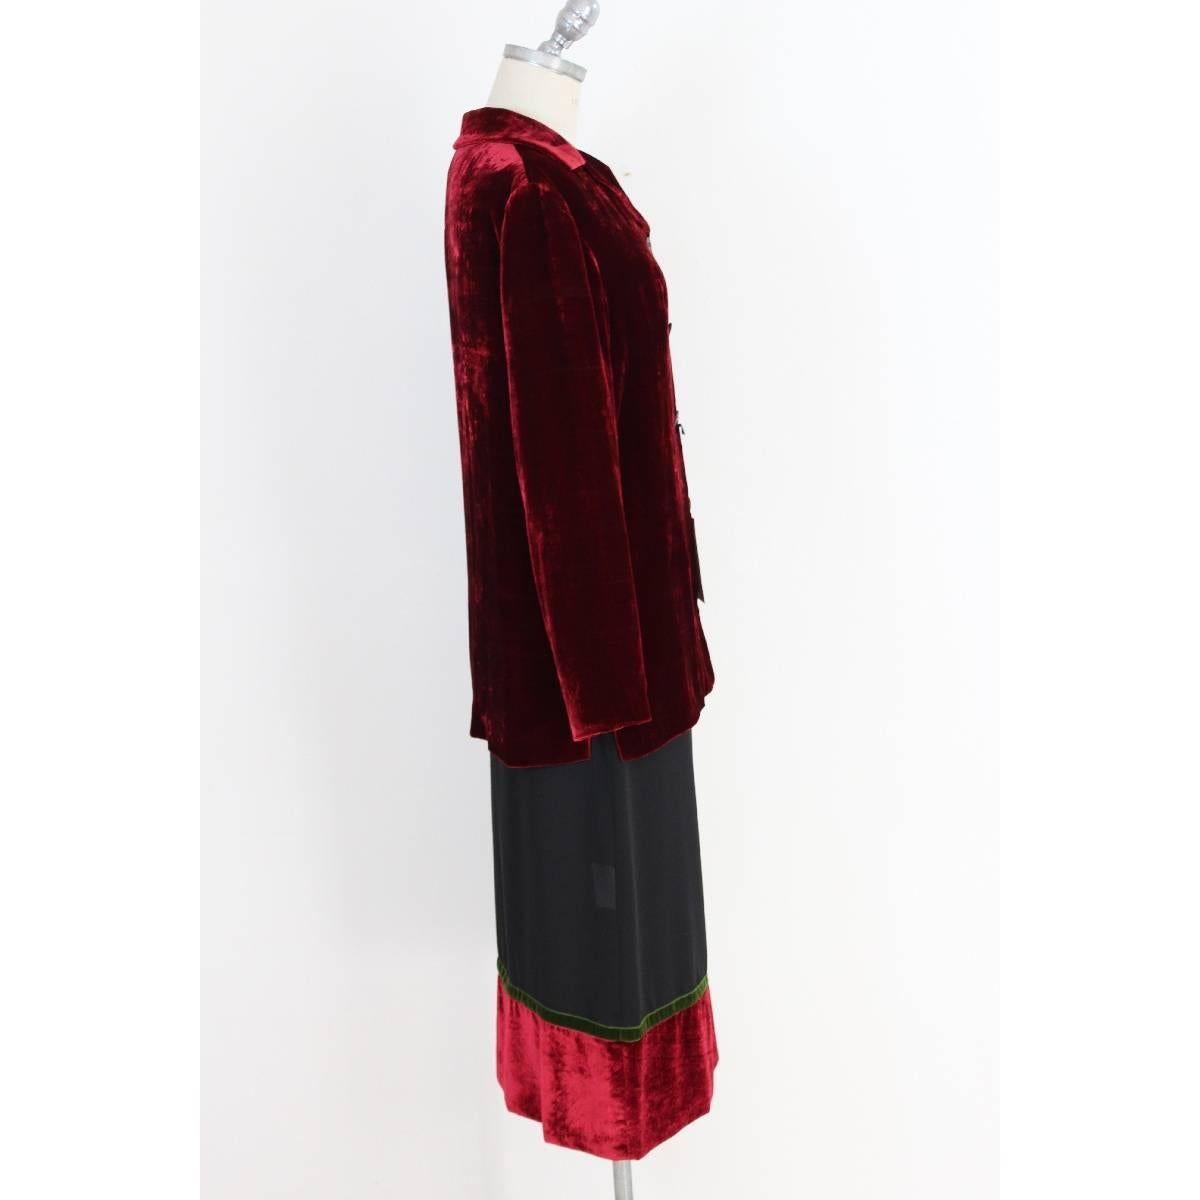 Burberry London skirt suit velvet red jacket size 42 it made italy 1990s NWT In New Condition For Sale In Brindisi, IT